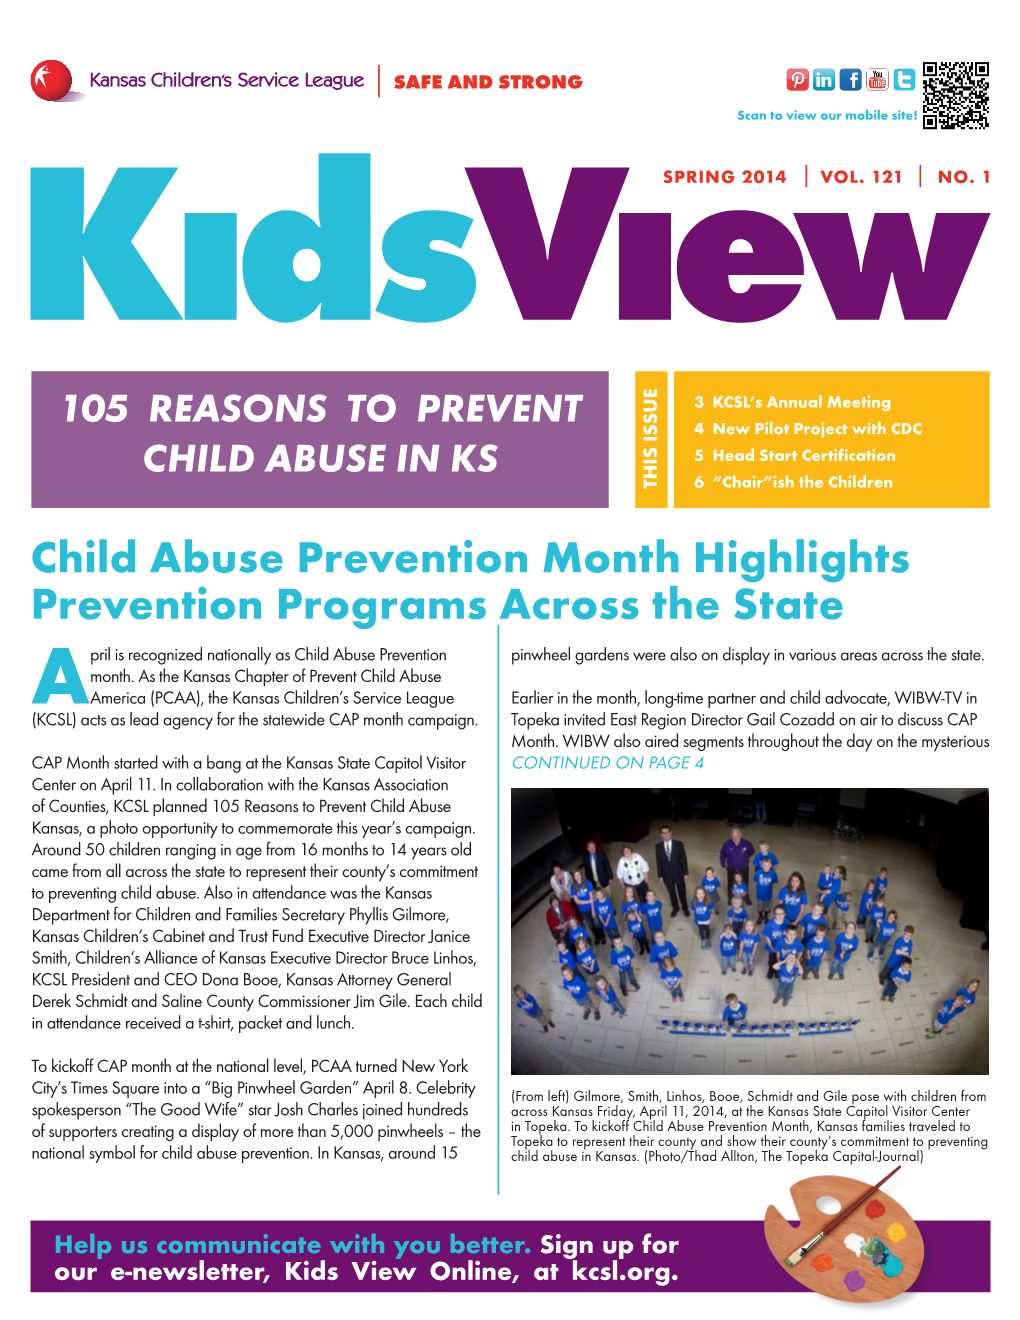 Child Abuse Prevention Month Highlights Prevention Programs